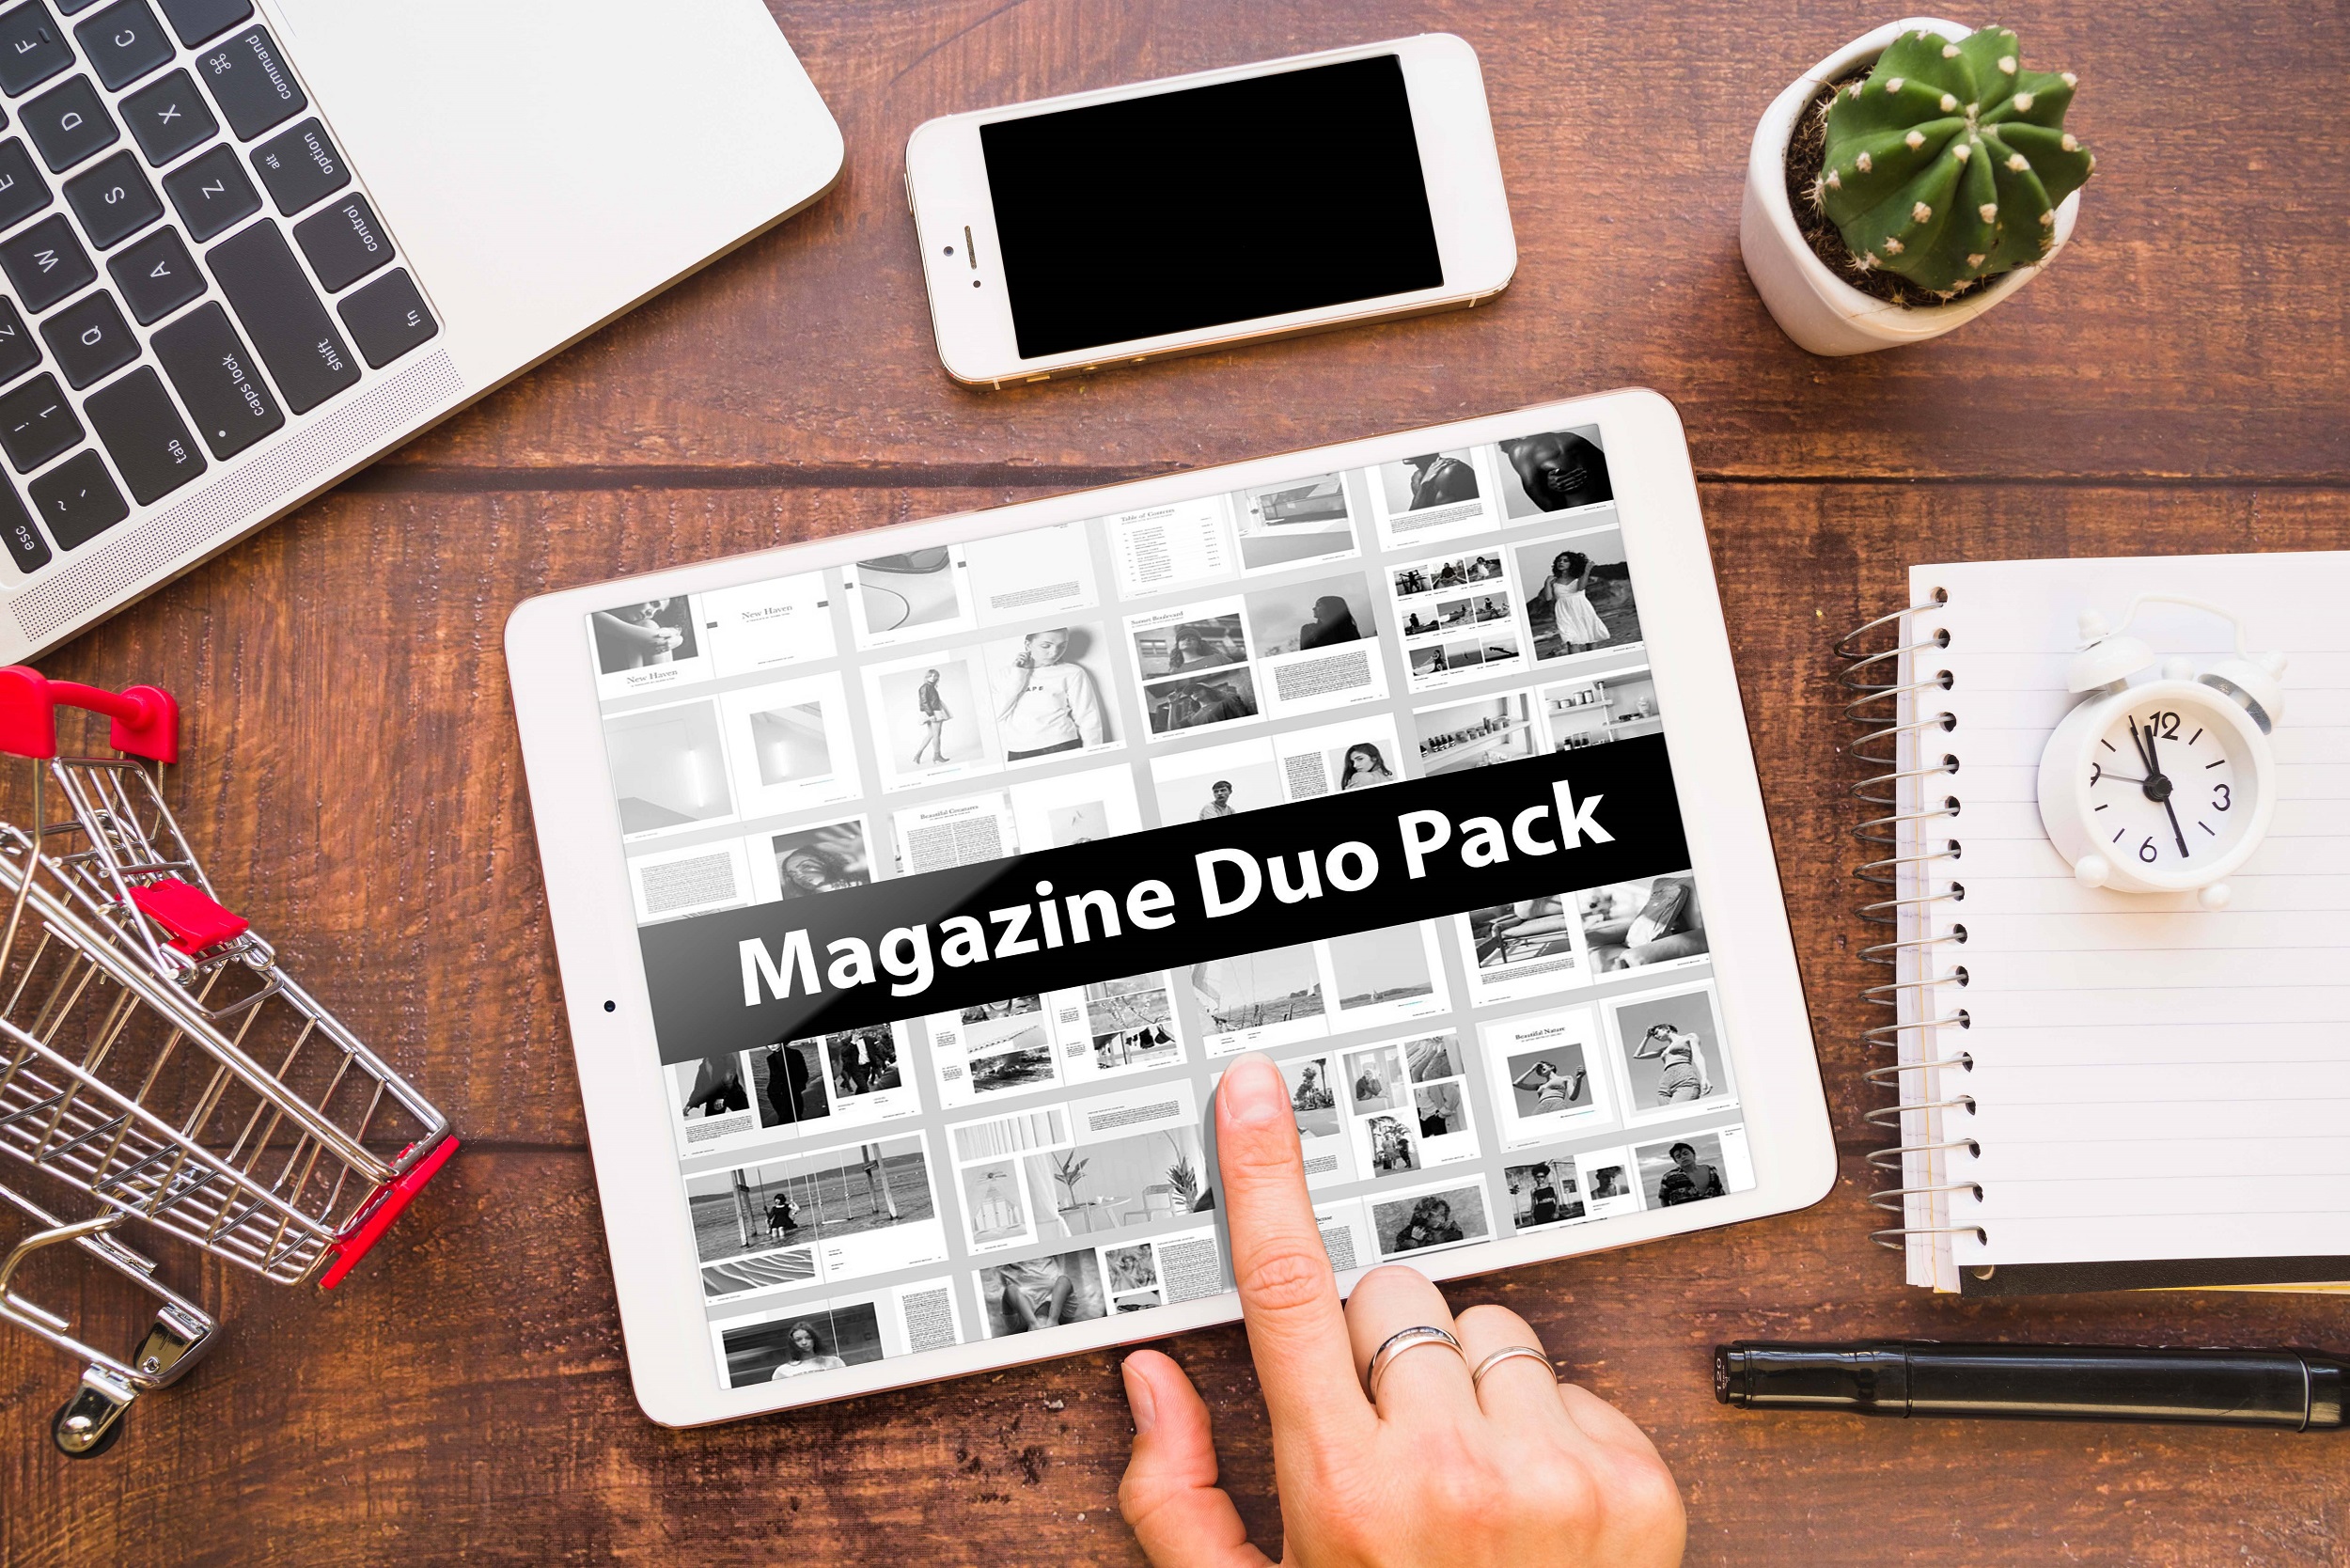 Magazine Duo Pack tablet